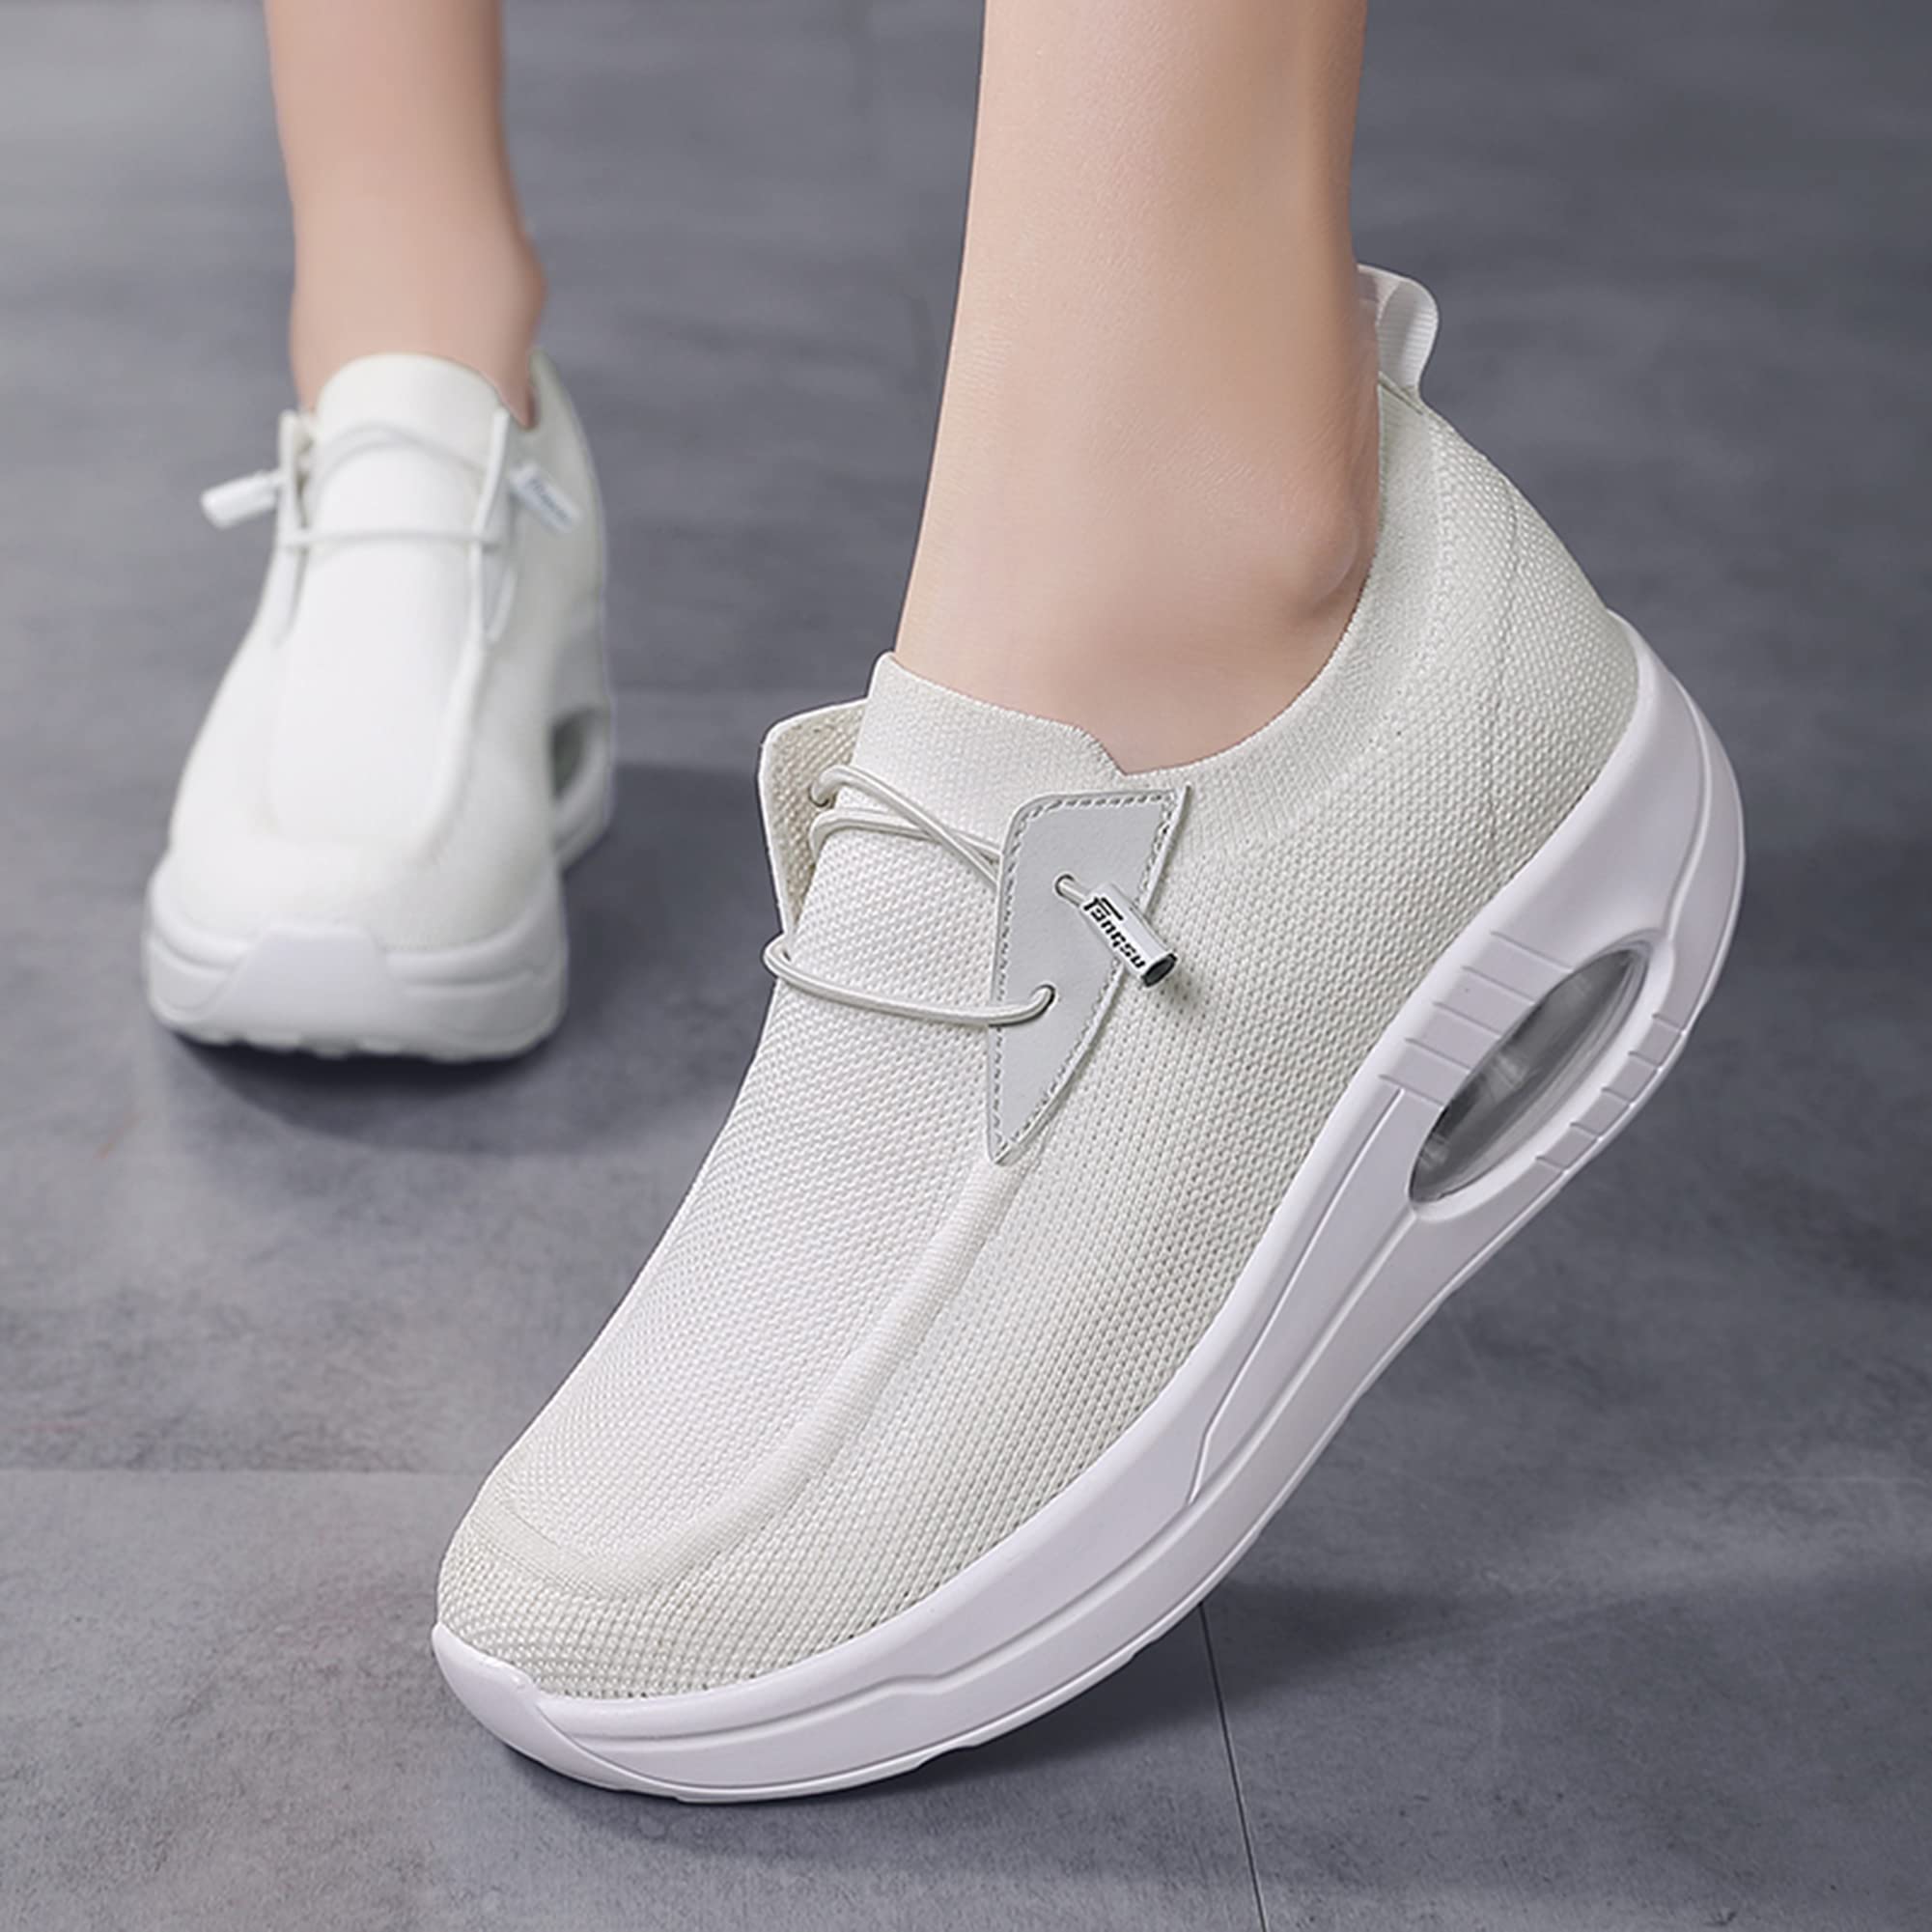 AUUGK White Women's Slip-on Walking Shoes Mesh Breathe Air Cushion Arch Support Sock Sneakers for Women Ladys Girls Fashion Platform Lightweight Loafers Non-Slip Nursing Work Running Shoes Size11